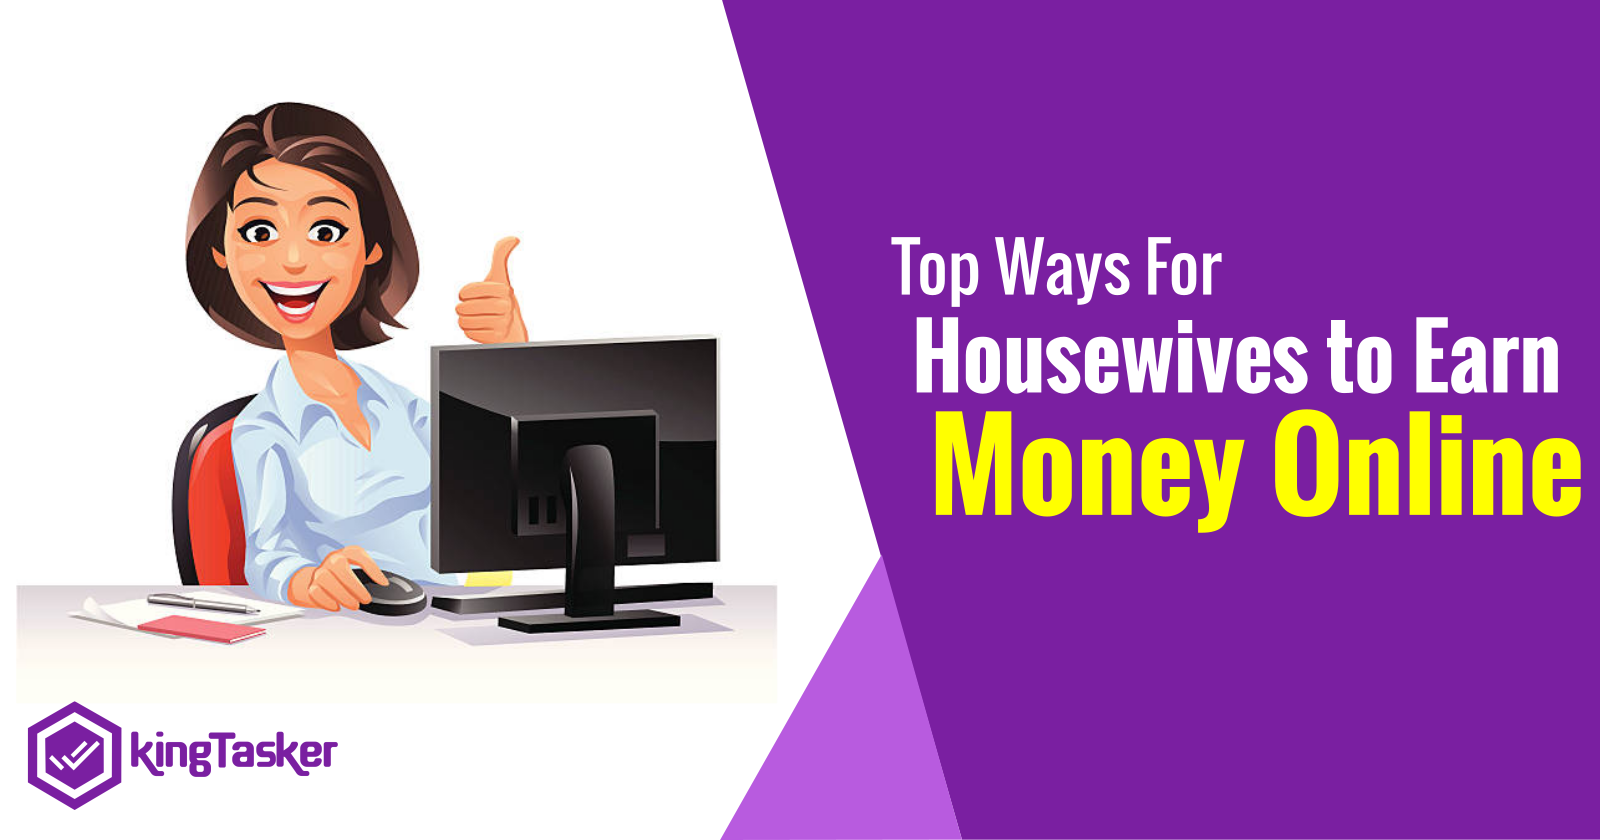 Top Ways For Housewives to Earn Money Online